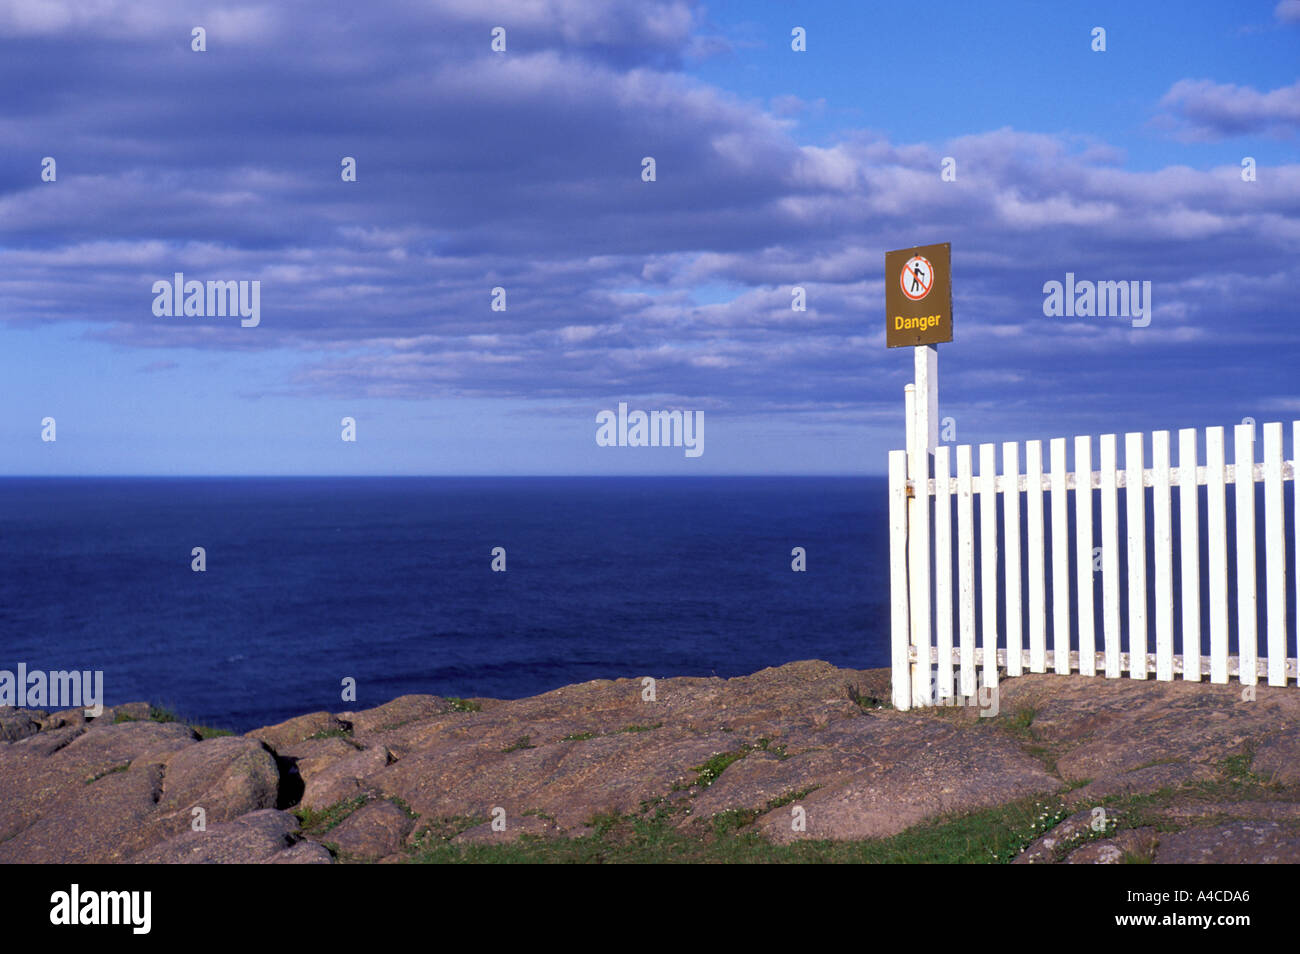 Danger sign and white fence along cliff in Newfoundland Canada Stock Photo